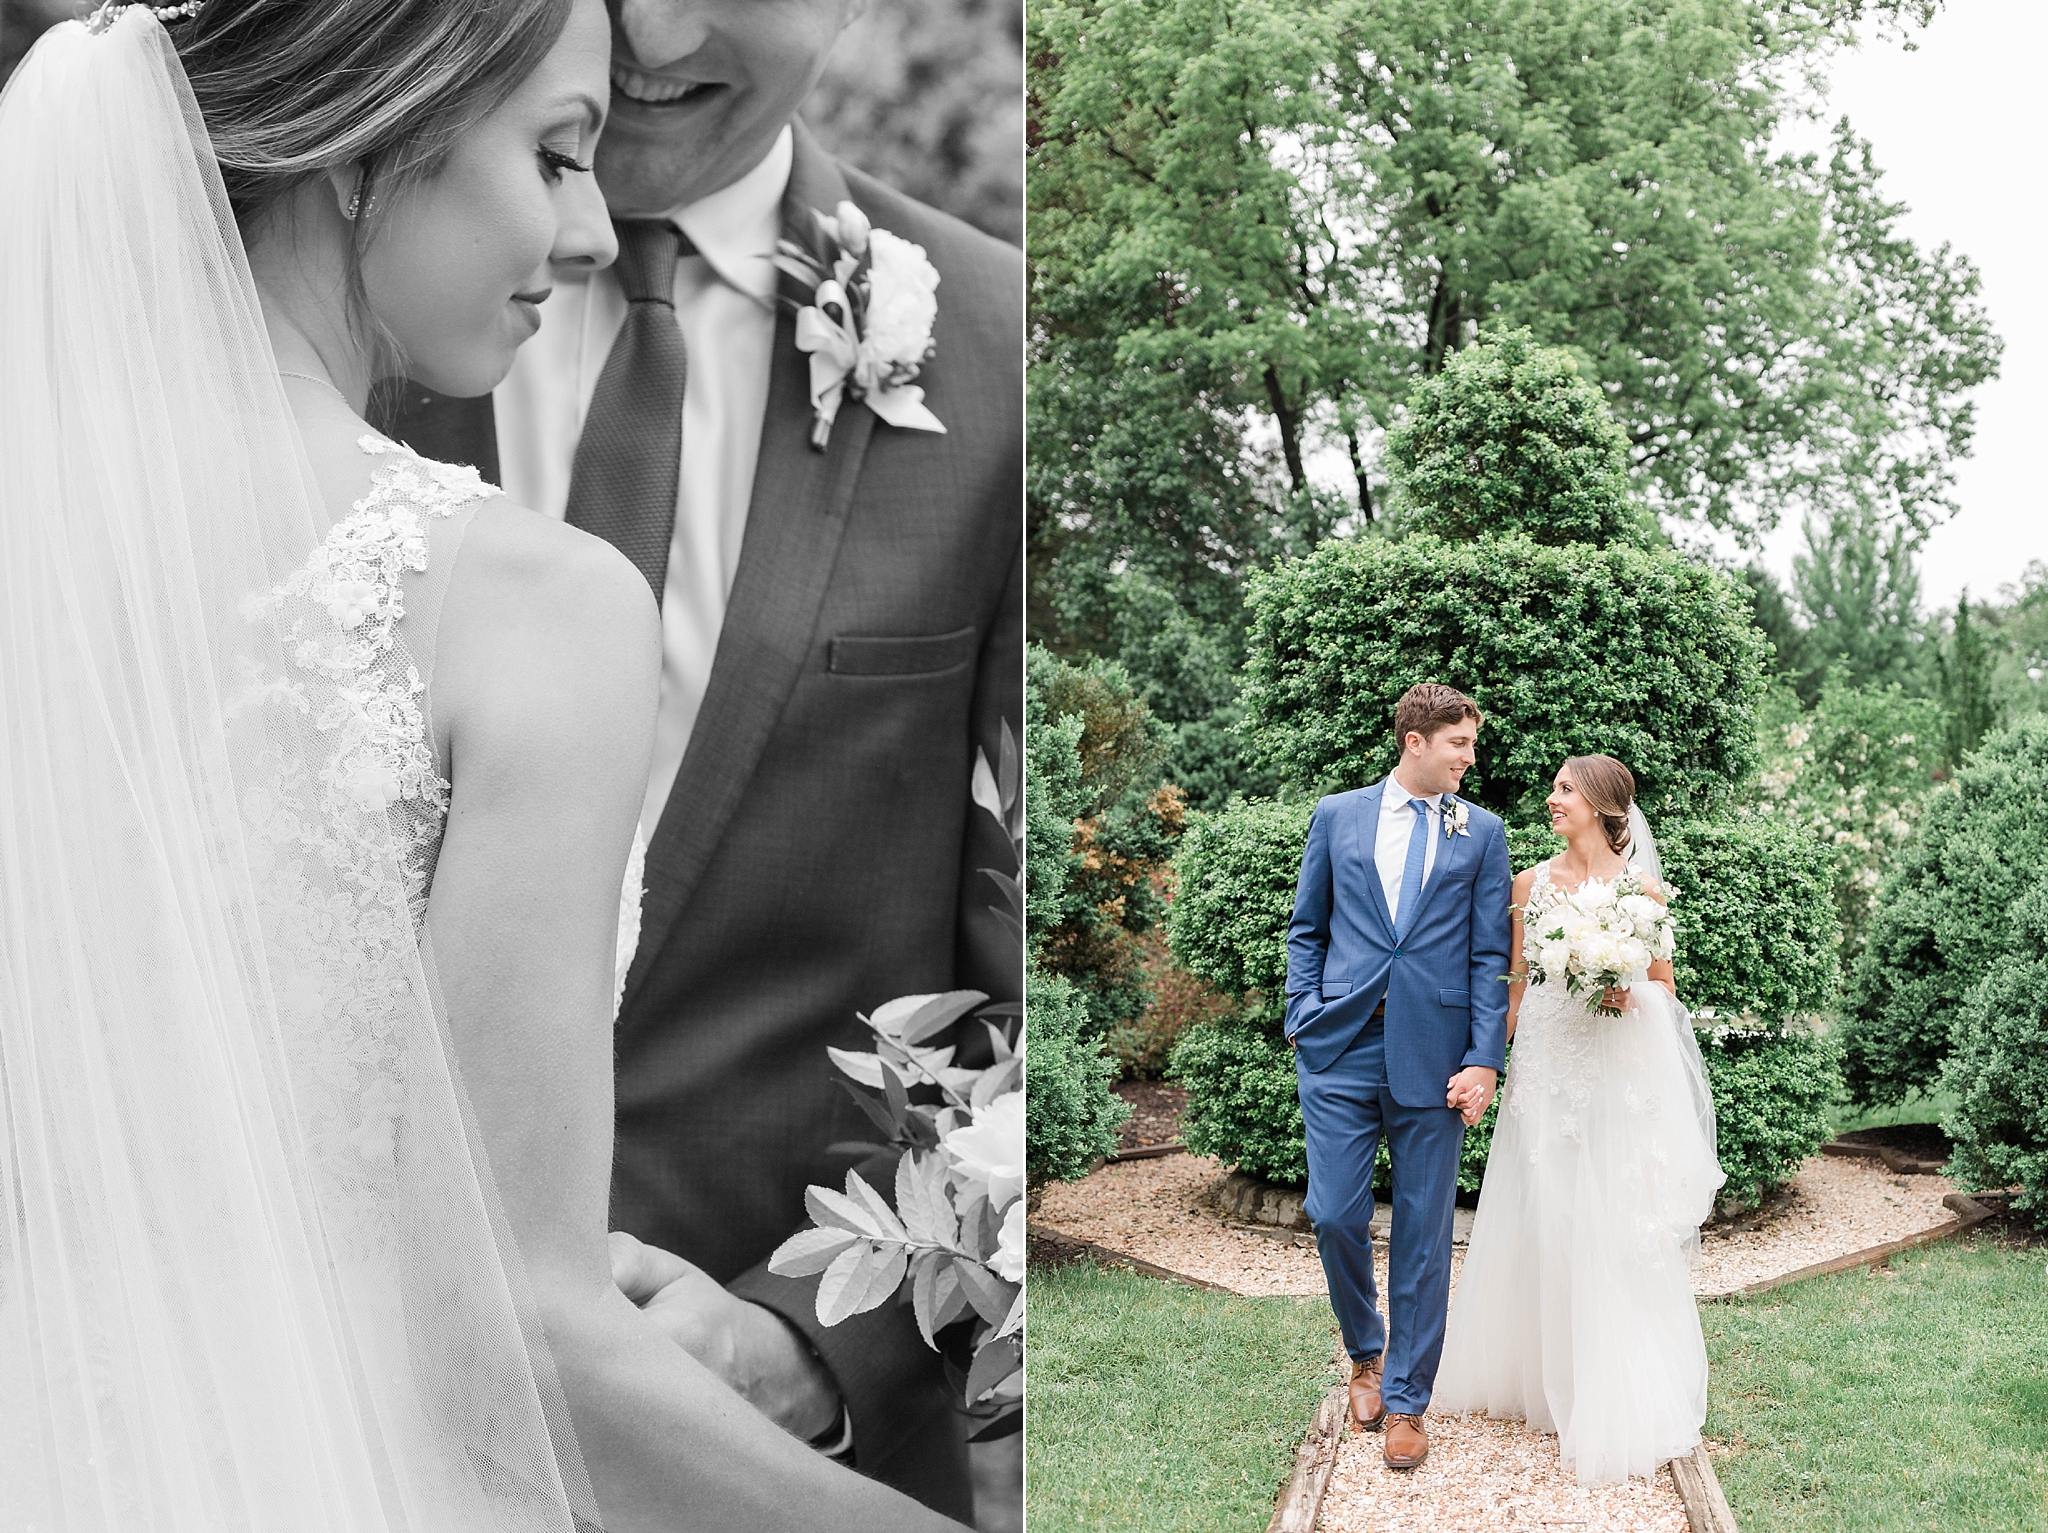 This romantic garden wedding was photographed at Airlie Center in Warrenton, VA by fine art Washington, DC photographer, Alicia Lacey. 